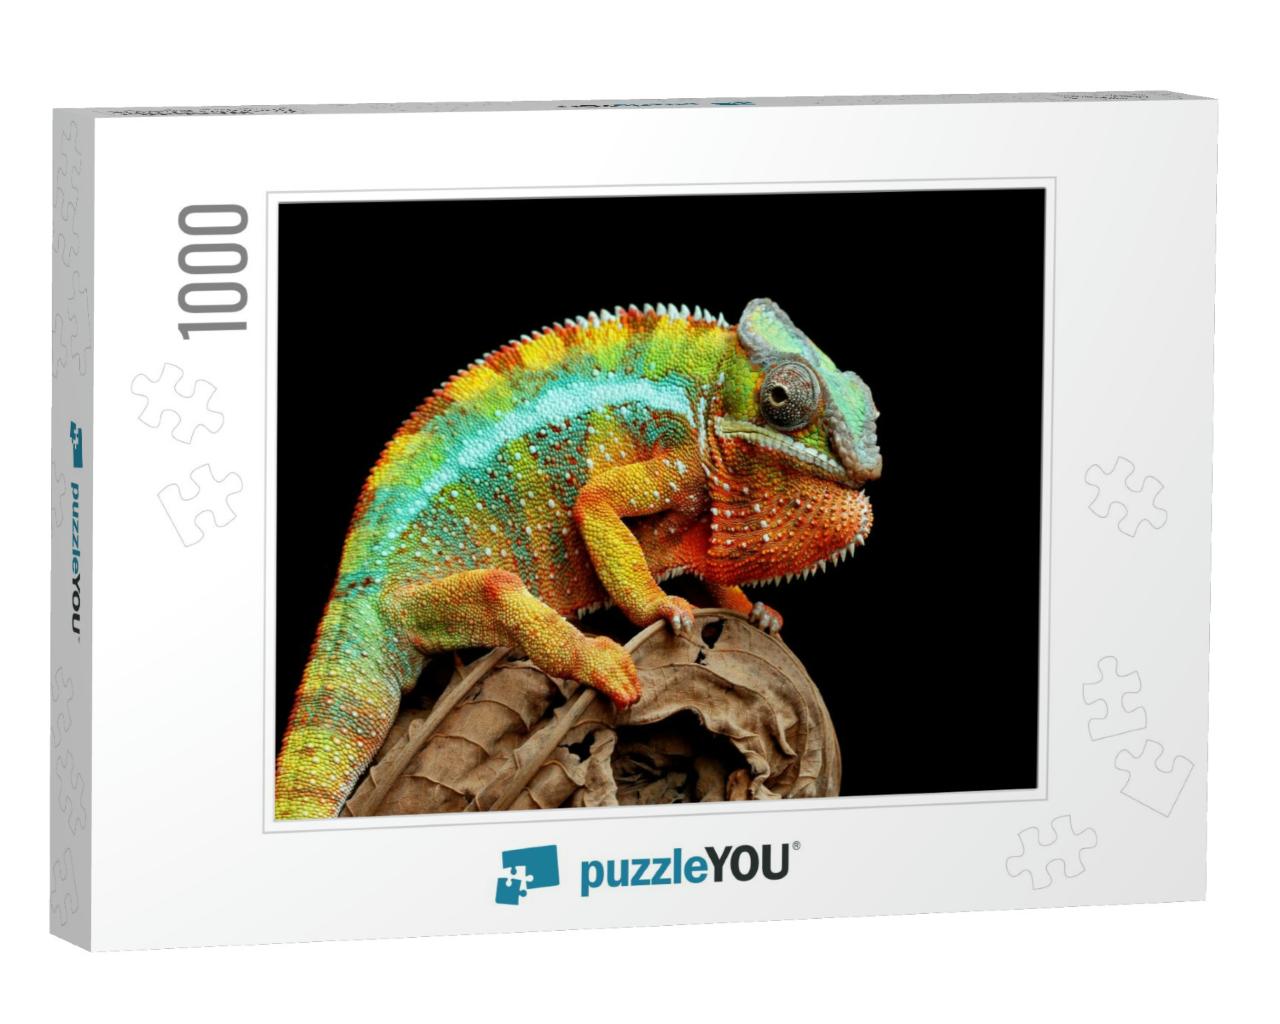 Beautiful of Chameleon Panther, Chameleon Panther on Bran... Jigsaw Puzzle with 1000 pieces